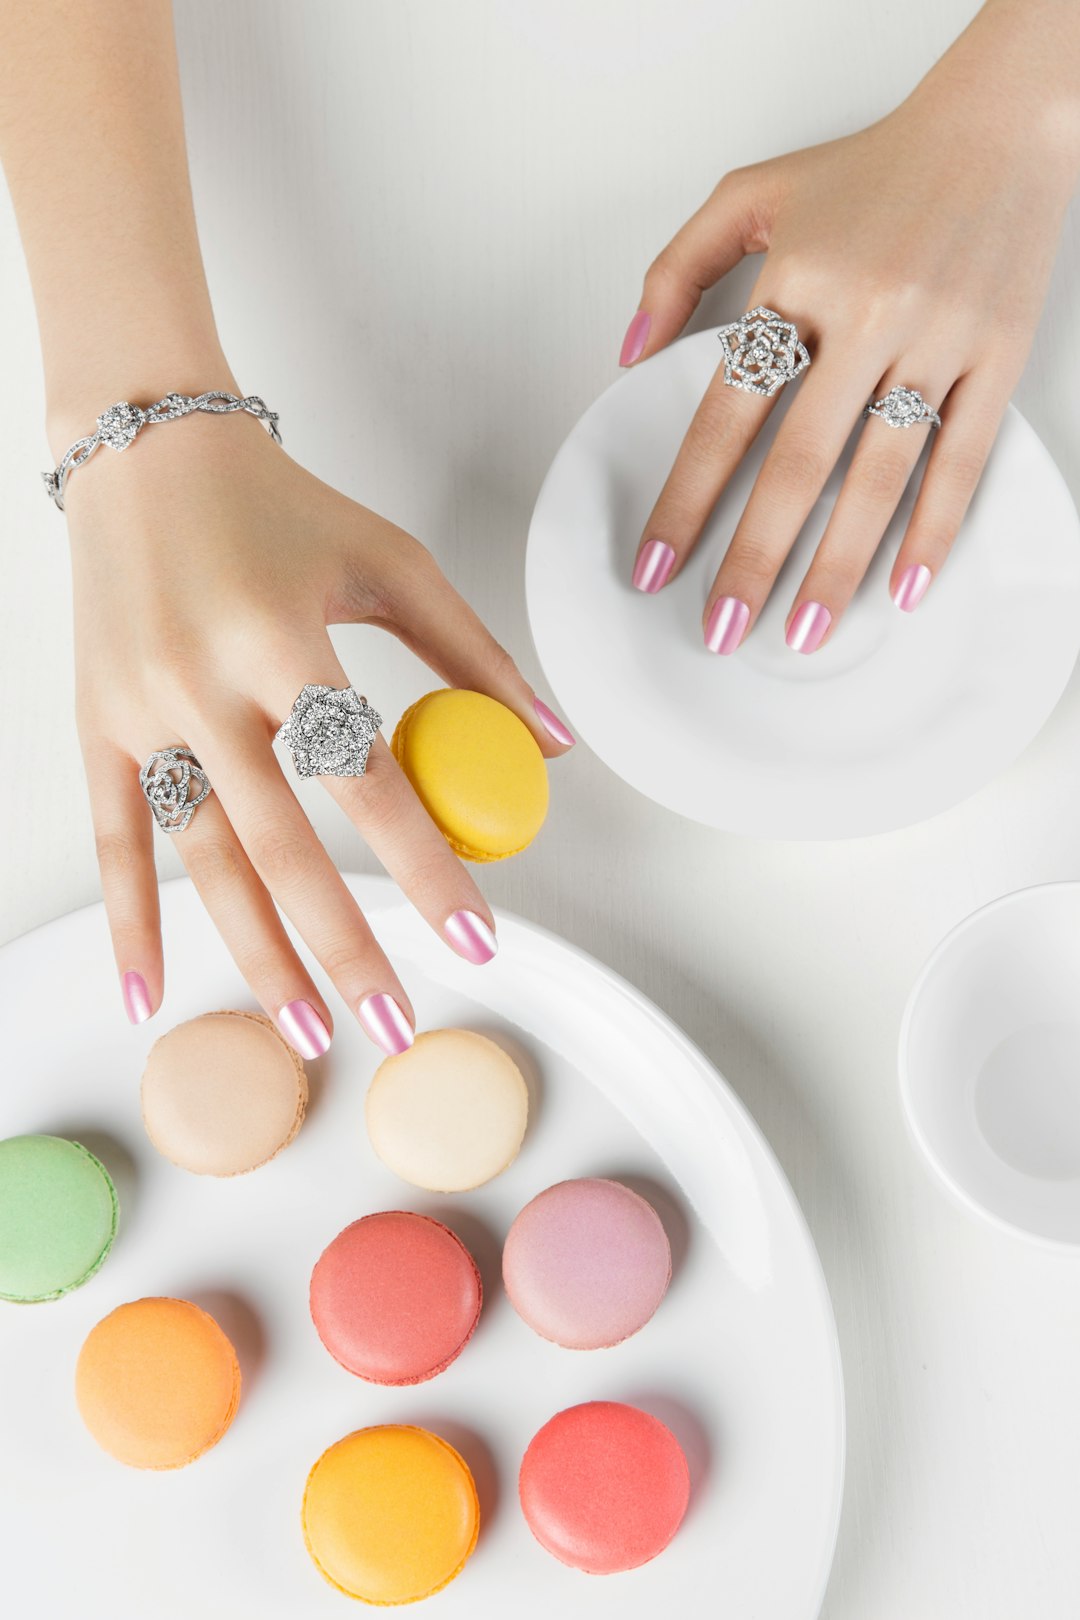 Nail accessories